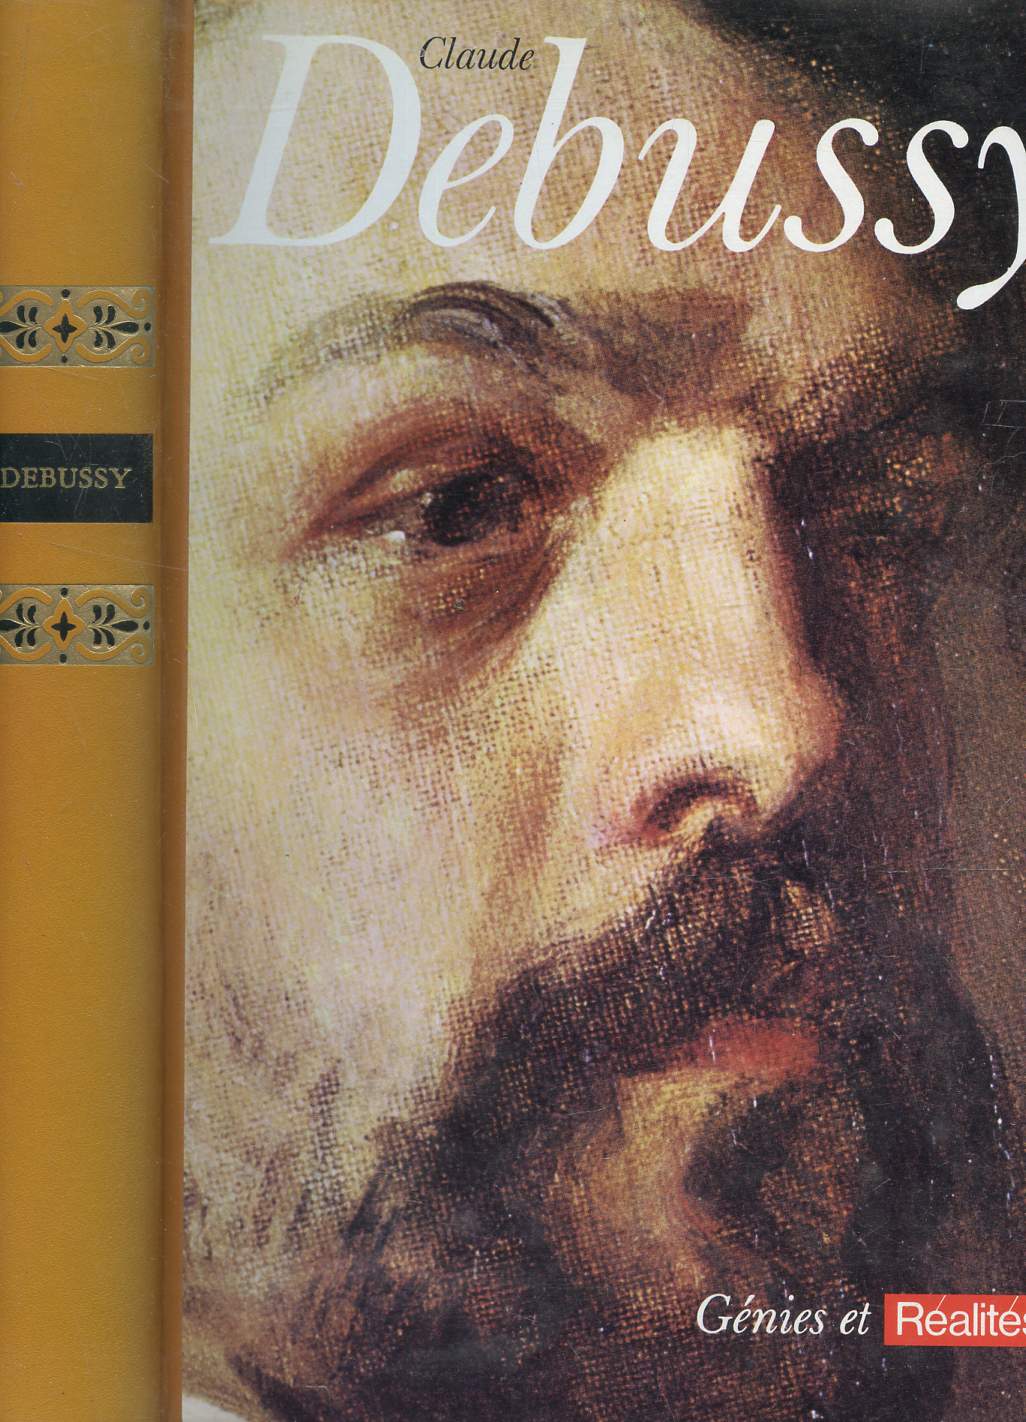 CLAUDE DEBUSSY / COLLECTION GENIES ET REALITES.